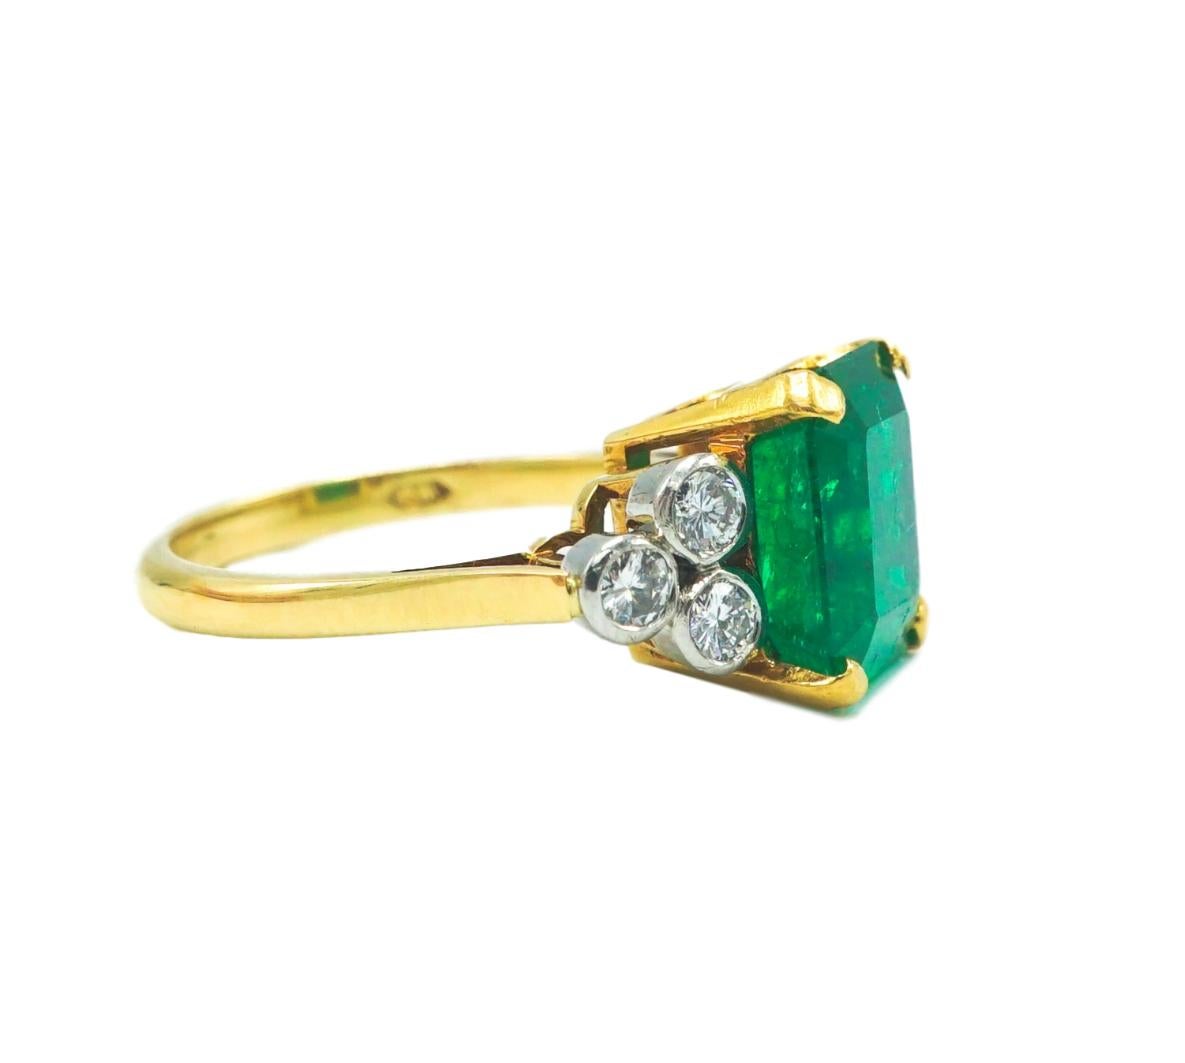 Emerald and Diamond Ring with AGl Report, Centering on rectangular emerald with diamond-set shoulders.
Emerald 4.8 cts  with certificate. 
Metal: 18k Yellow Gold
Diamonds: 6 round diamonds with approximate total weight of 0.36 carats

SKU#R-01415